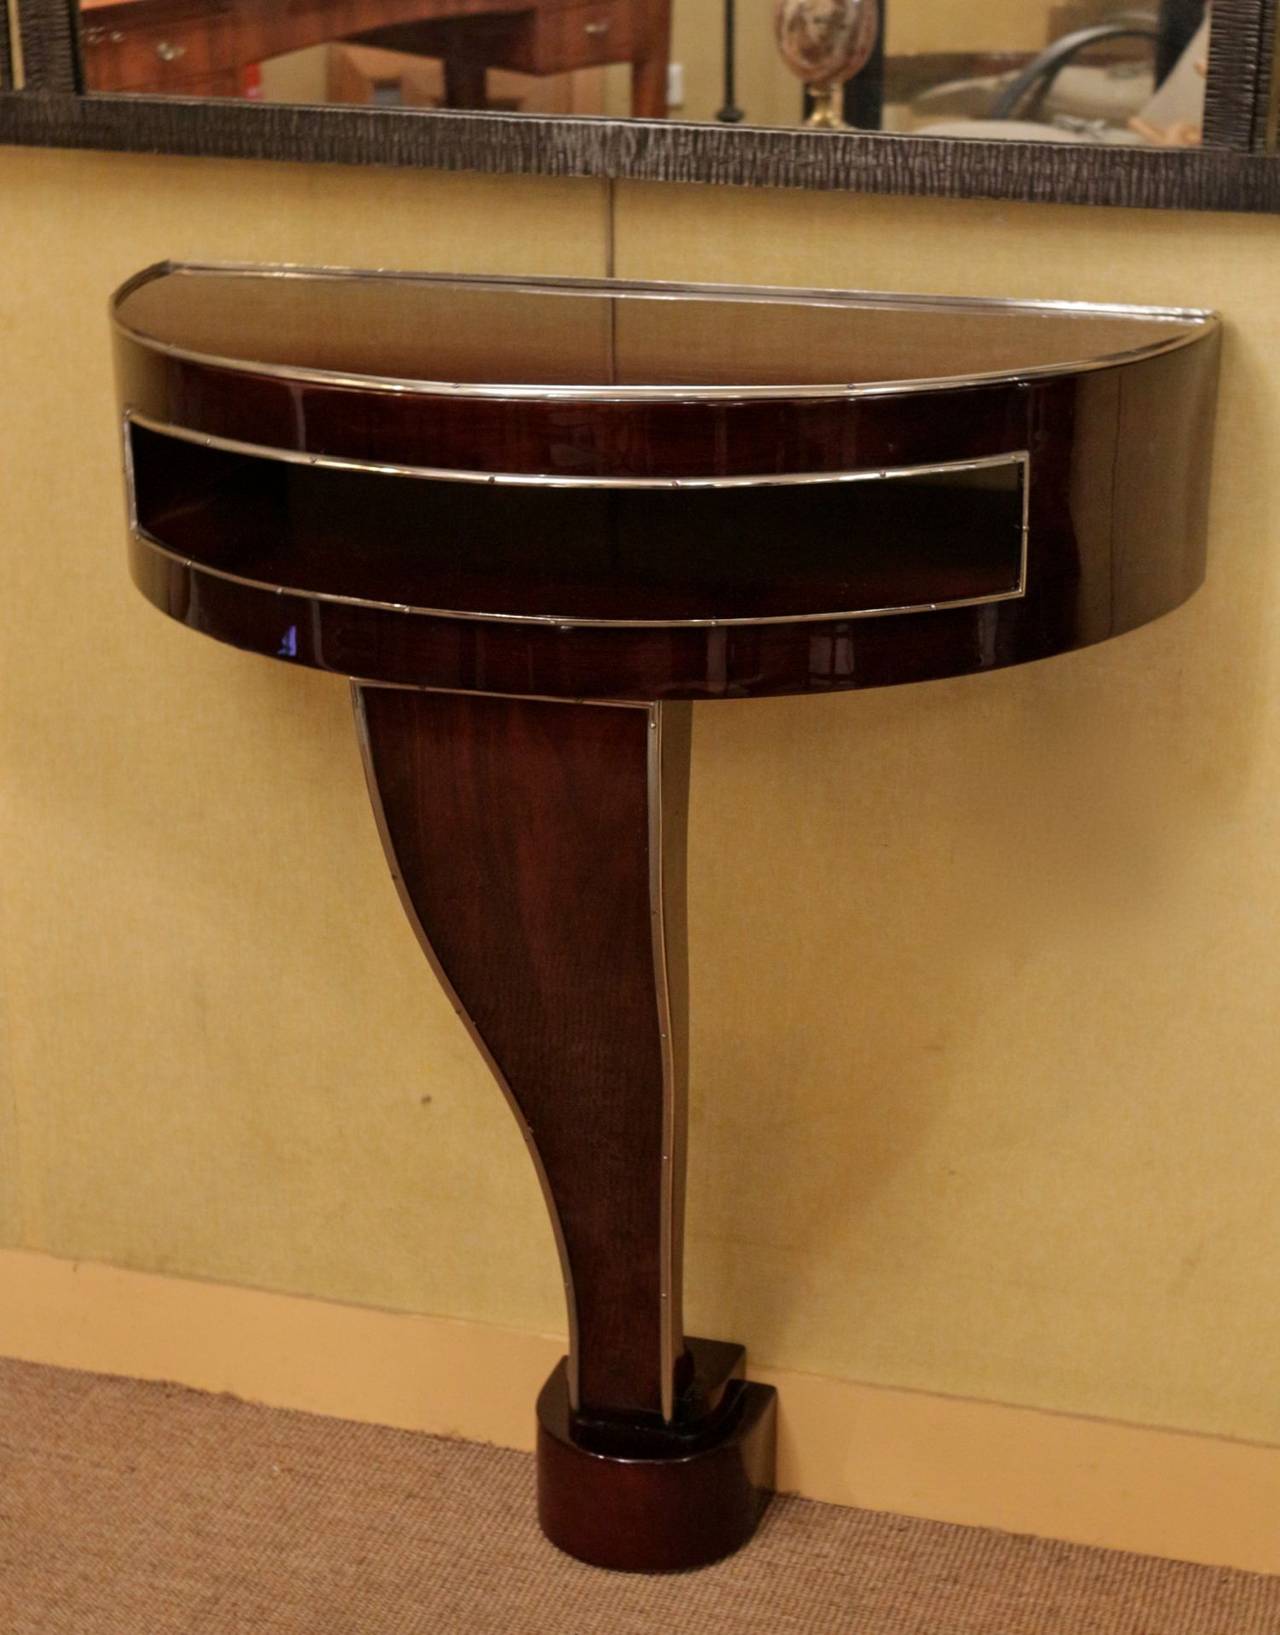 Art deco rosewood console. Half-moon top opened on its middle. The console stands on a curved foot resting on a base. Nickel plated wands enhance the console shape.